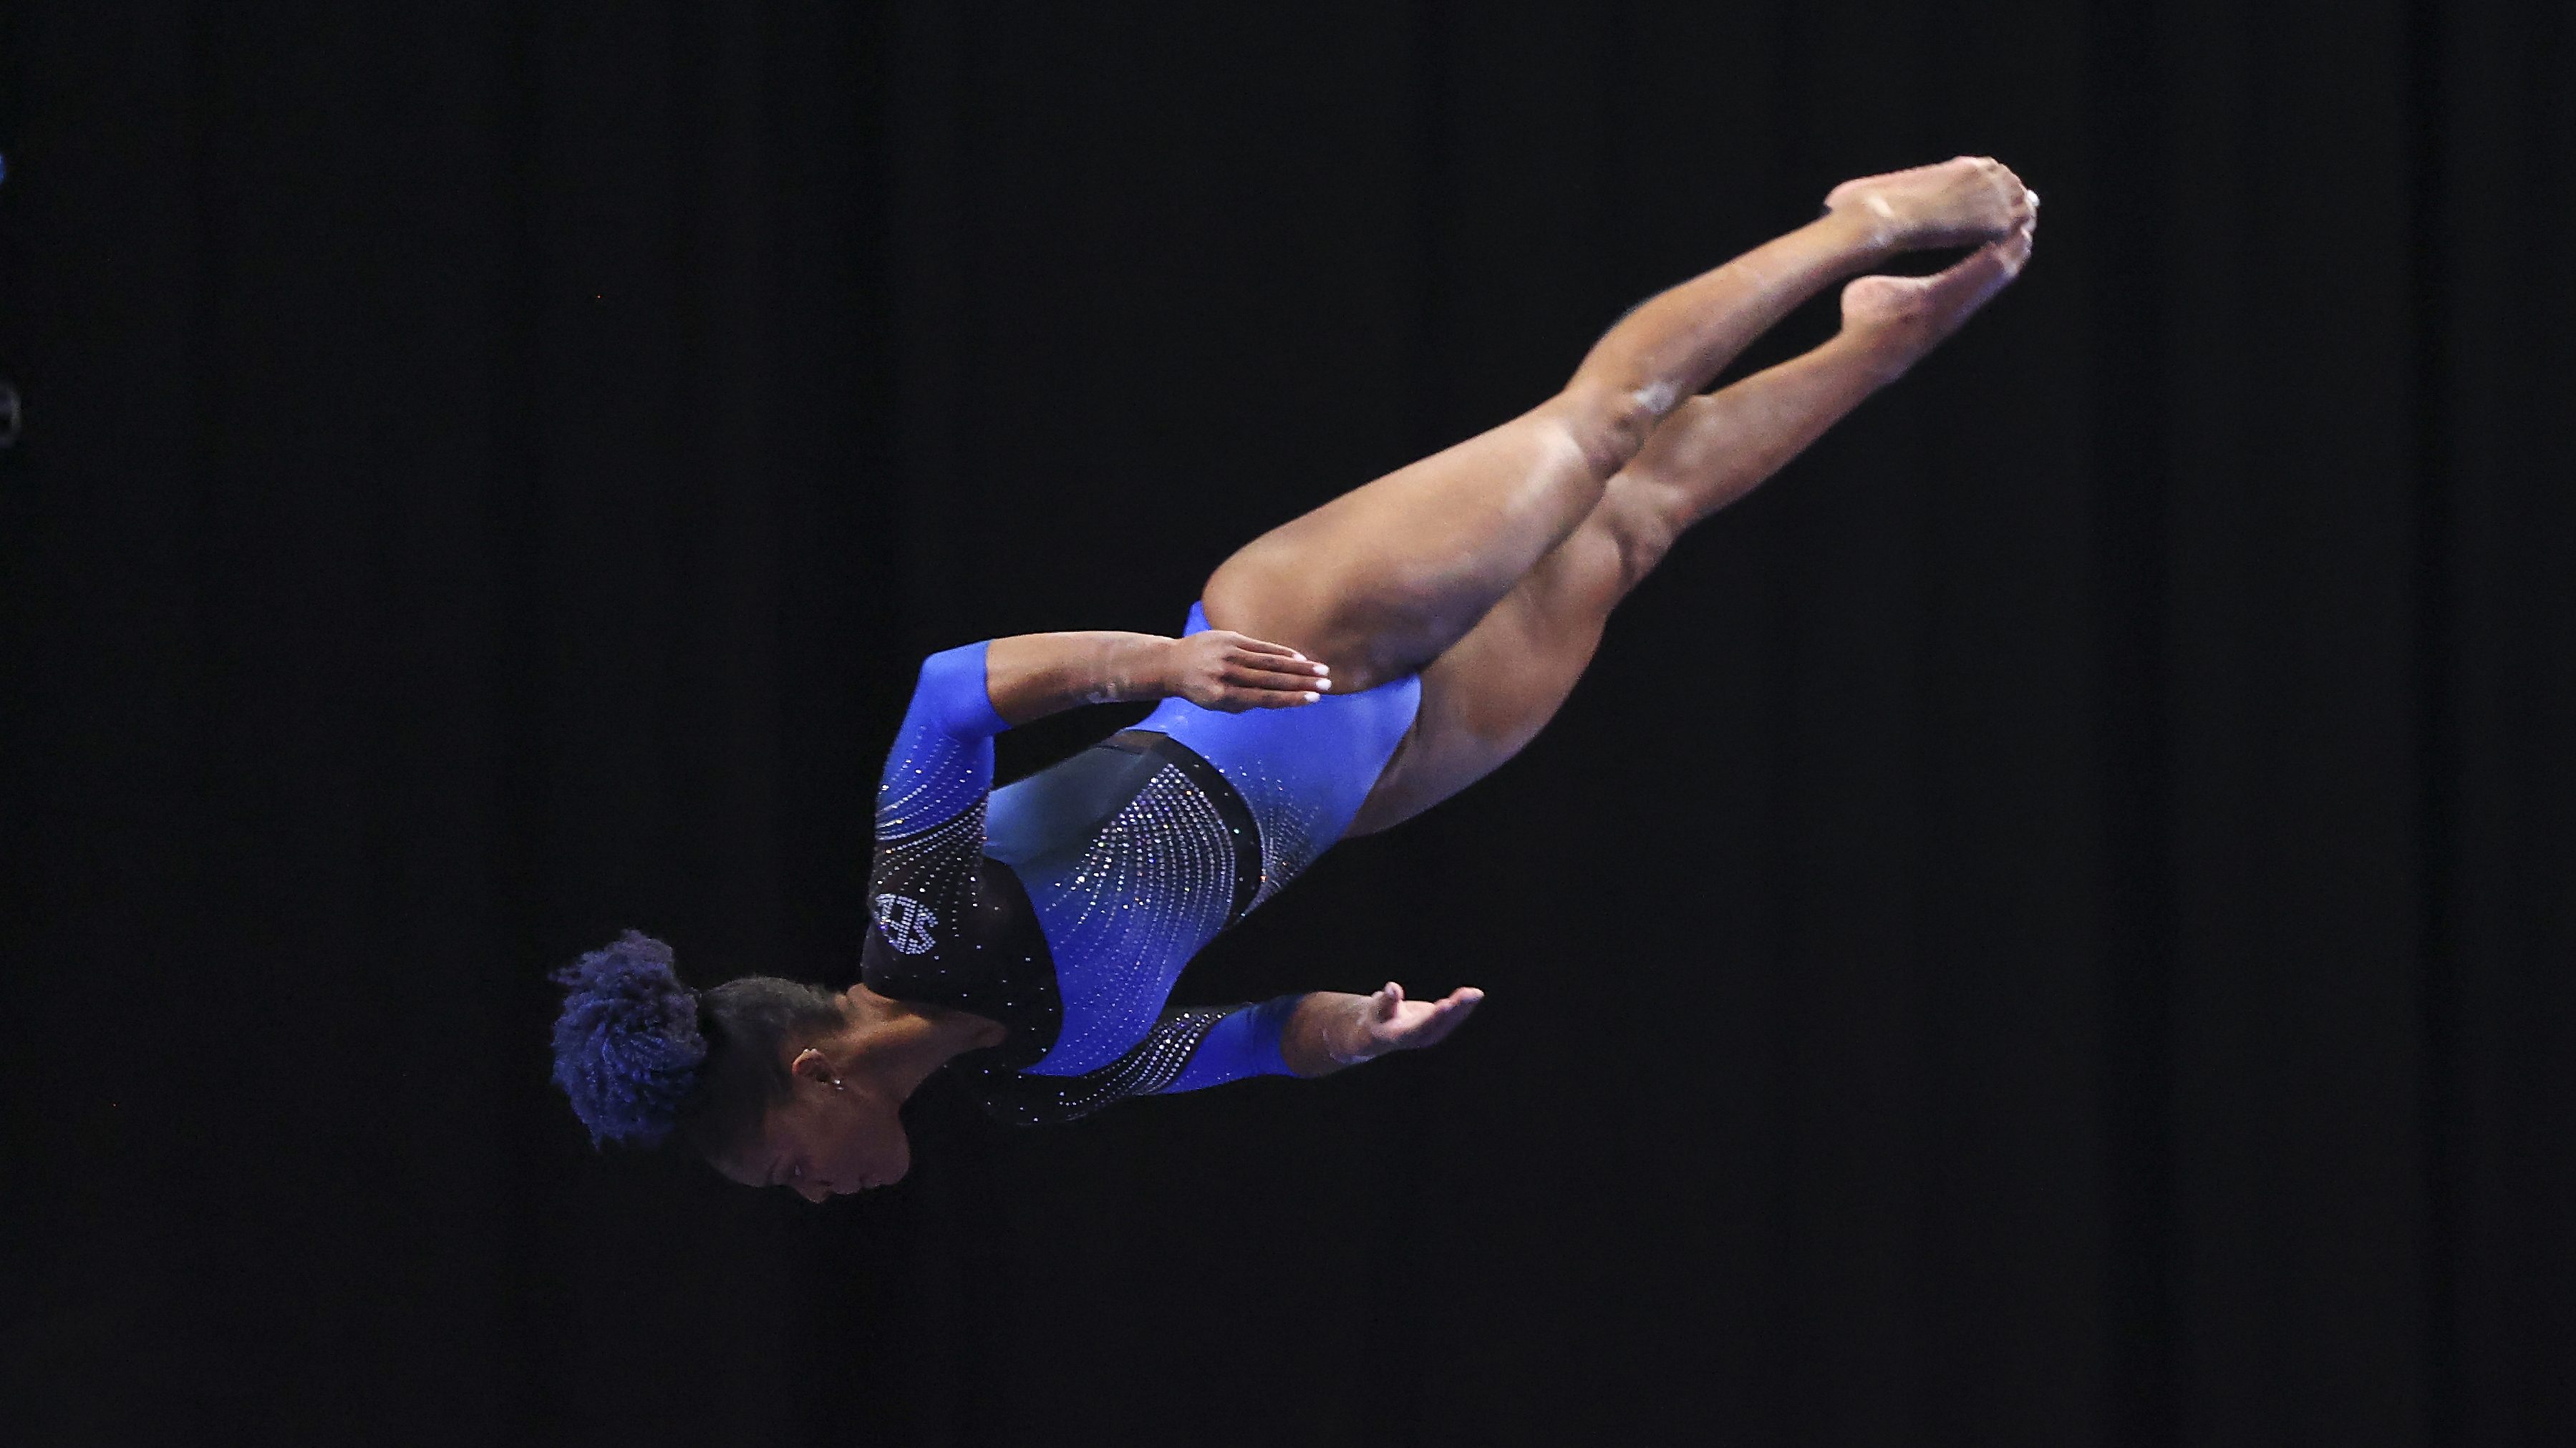 Trinity Thomas of the Florida Gators competes in the balance beam during the Division I Womens Gymnastics Championship held at Dickies Arena on April 14, 2022 in Fort Worth, Texas.